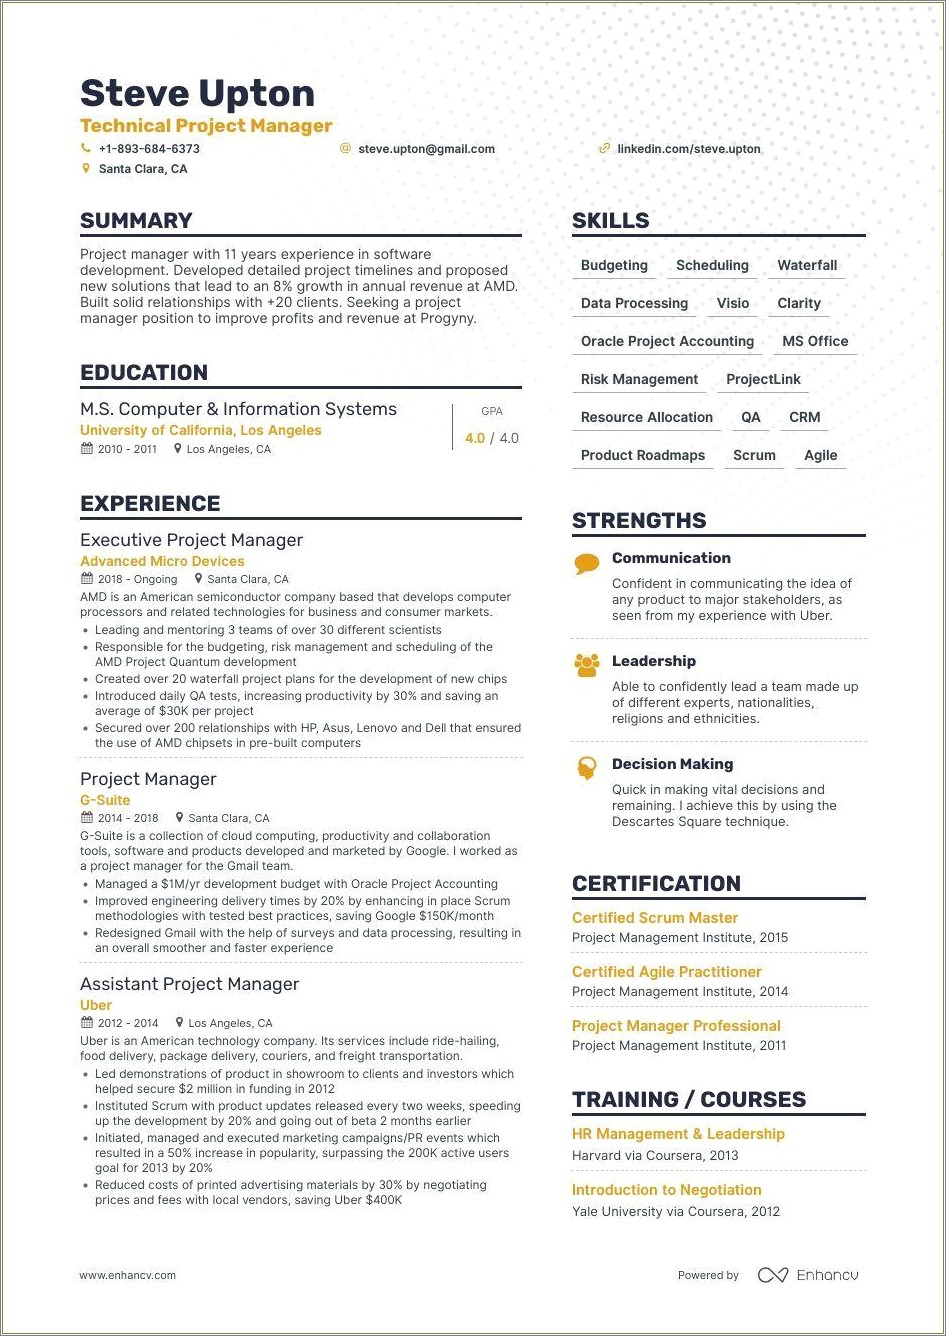 Resume Examples Oil And Gas Industry